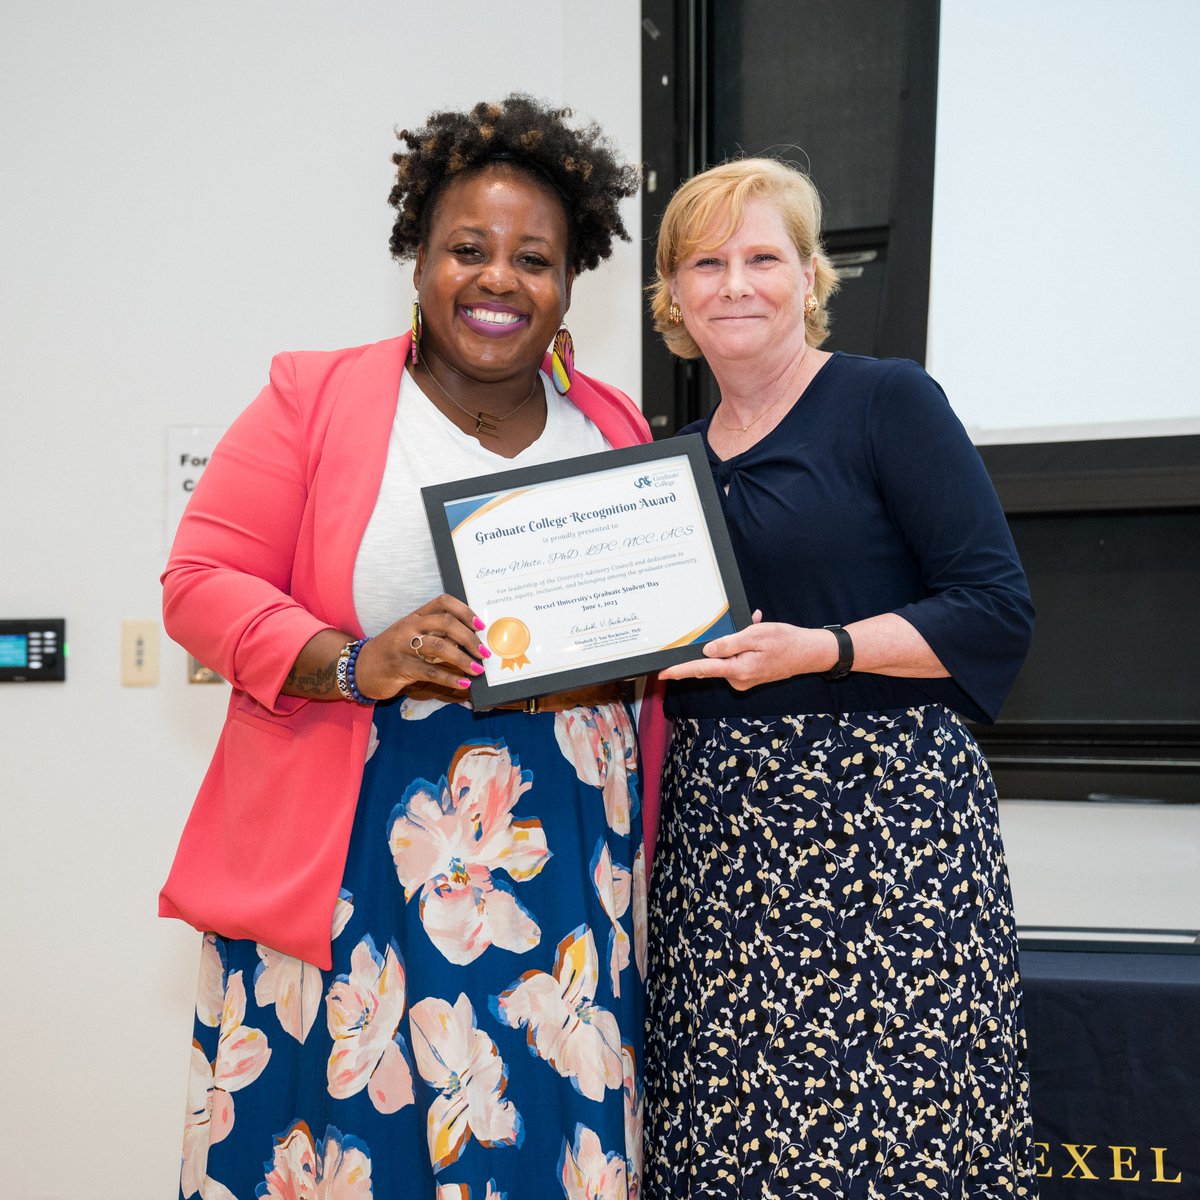 Ebony White, PhD, CNHP asst. clinical professor and chair of the Grad College's Diversity Advisory Council, received the Recognition Award for leadership and dedication to diversity, equity, inclusion and belonging among the grad community. Congratulations, Dr. White!